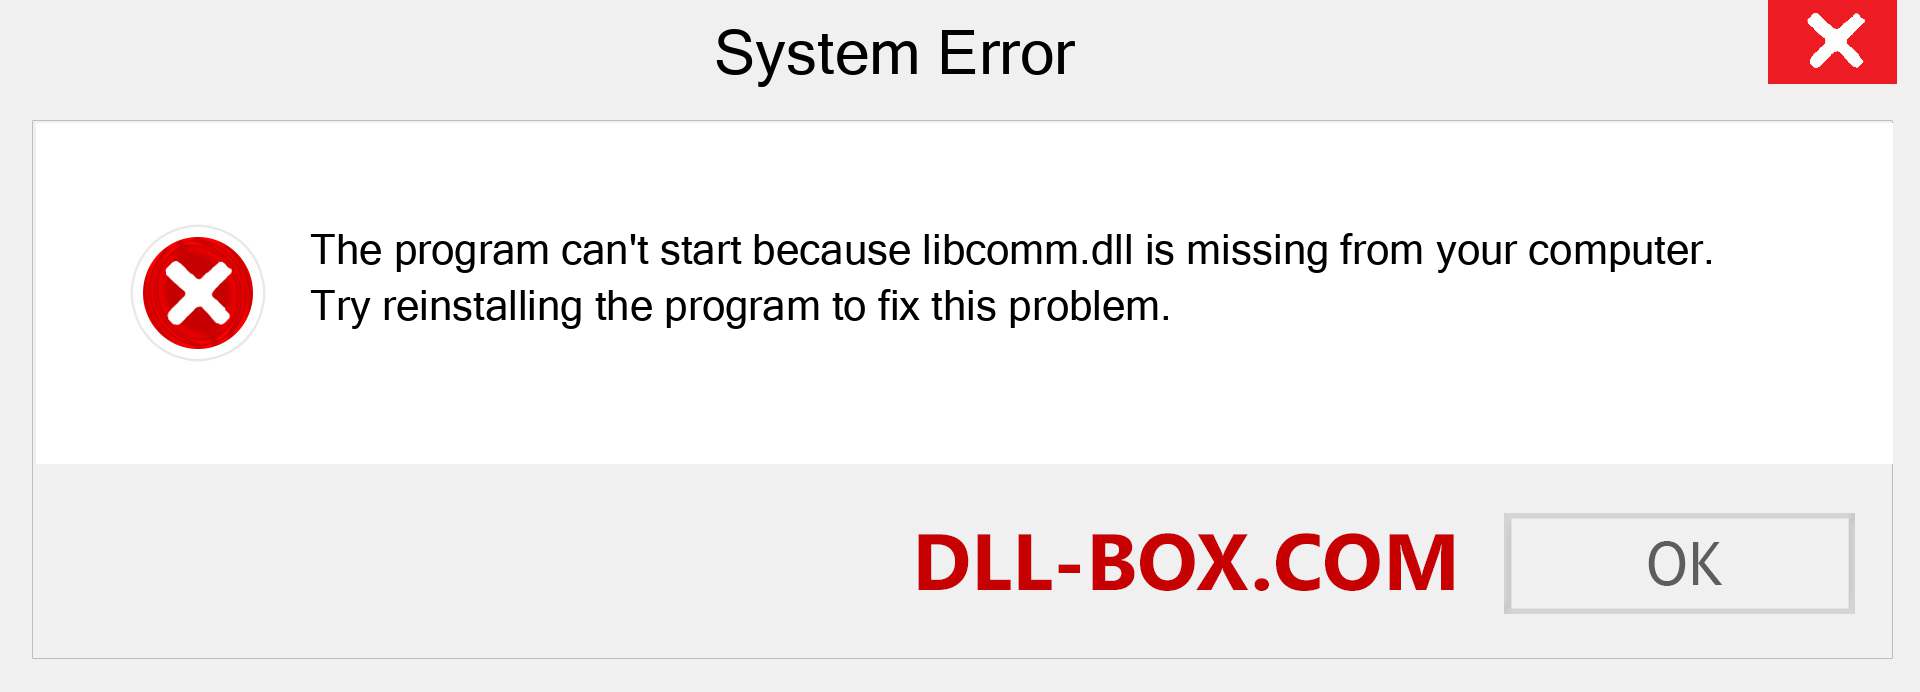  libcomm.dll file is missing?. Download for Windows 7, 8, 10 - Fix  libcomm dll Missing Error on Windows, photos, images